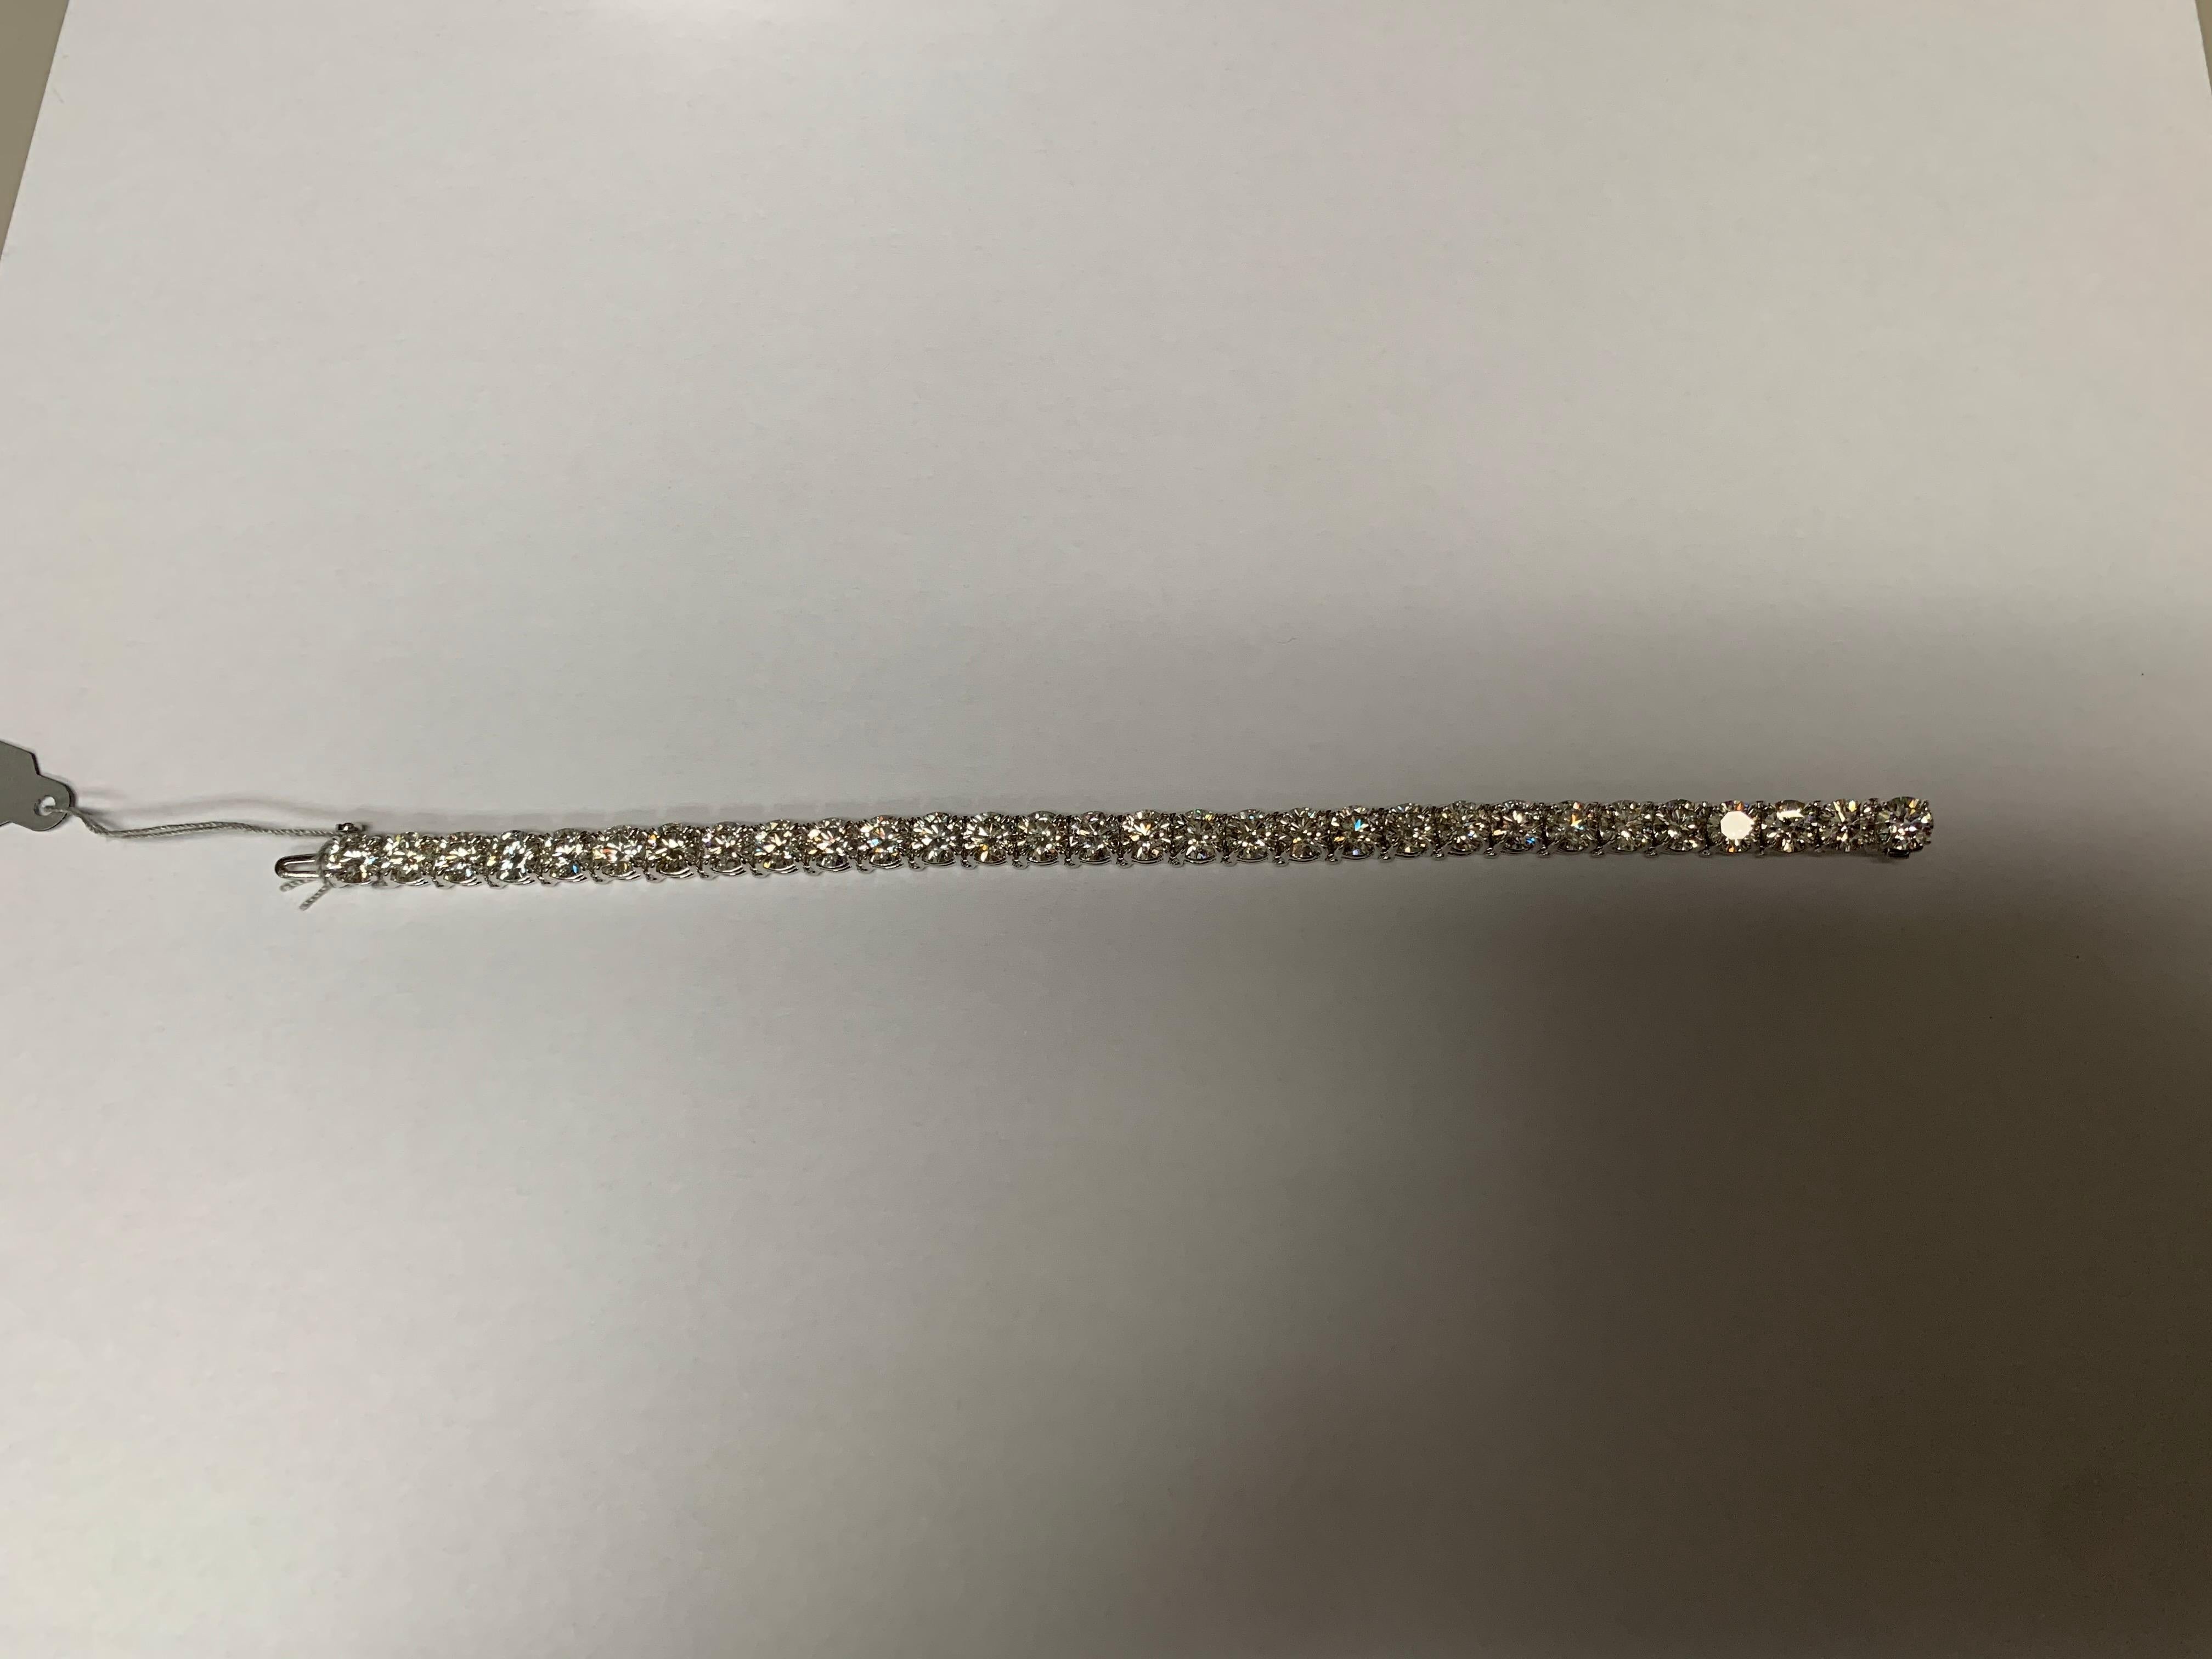 30 Round Brilliant Cut Diamonds are set in Tennis Bracelet.
Diamonds are Not Certified but Estimated to be H - I in Color and SI Type in Clarity.
